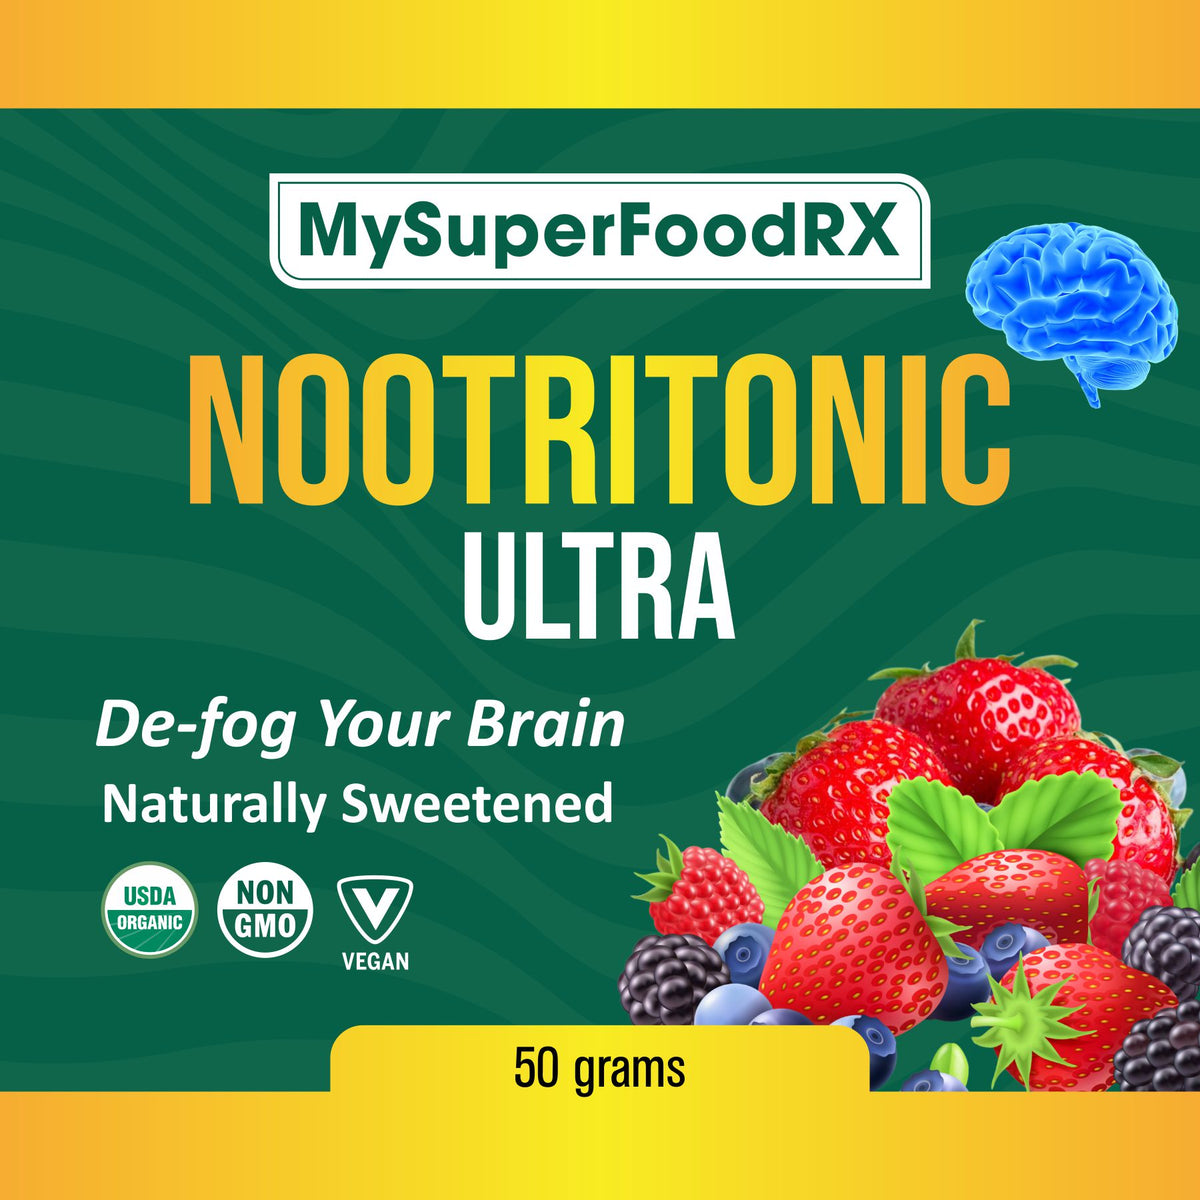 a box of my superfood rx nootritonic ultra